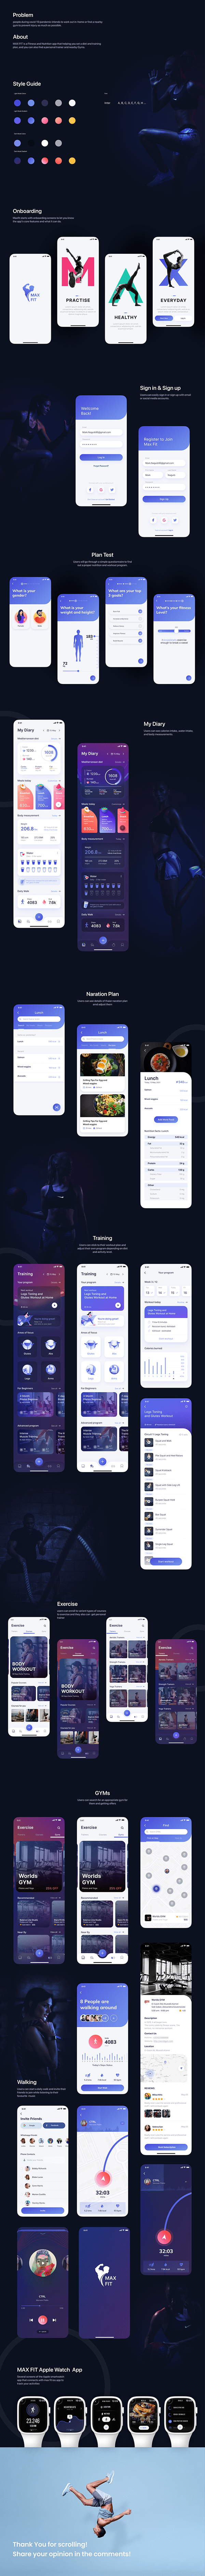 Max Fit Fitness and Nutrition App UI Design